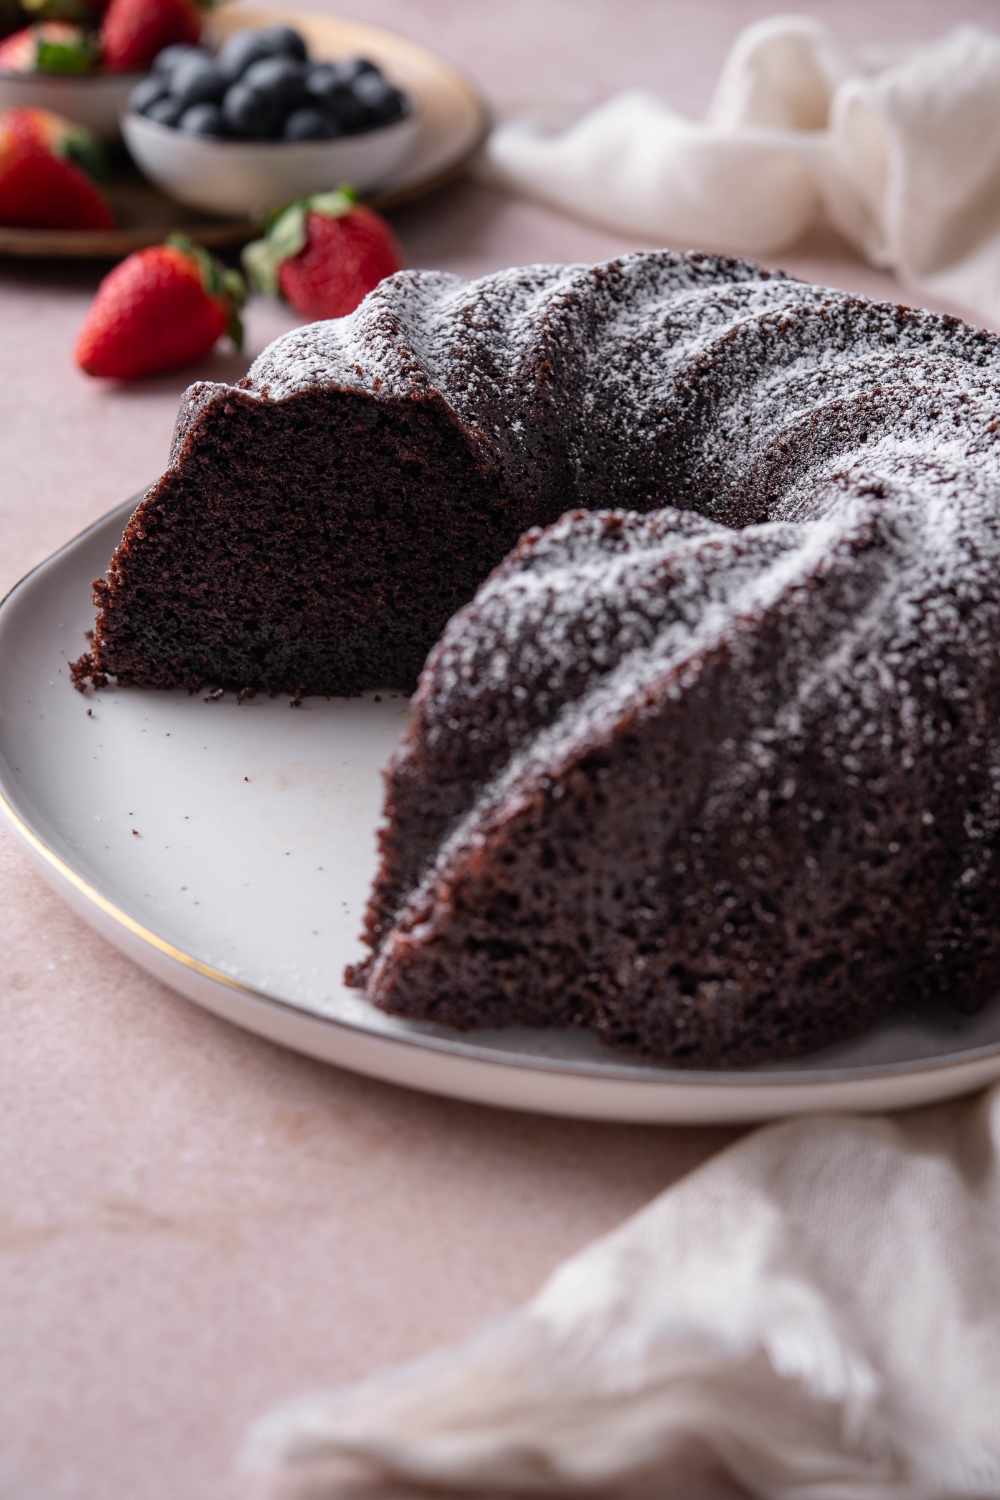 A whole chocolate pound cake sits on a white platter. Two slices have been cut from the cake.